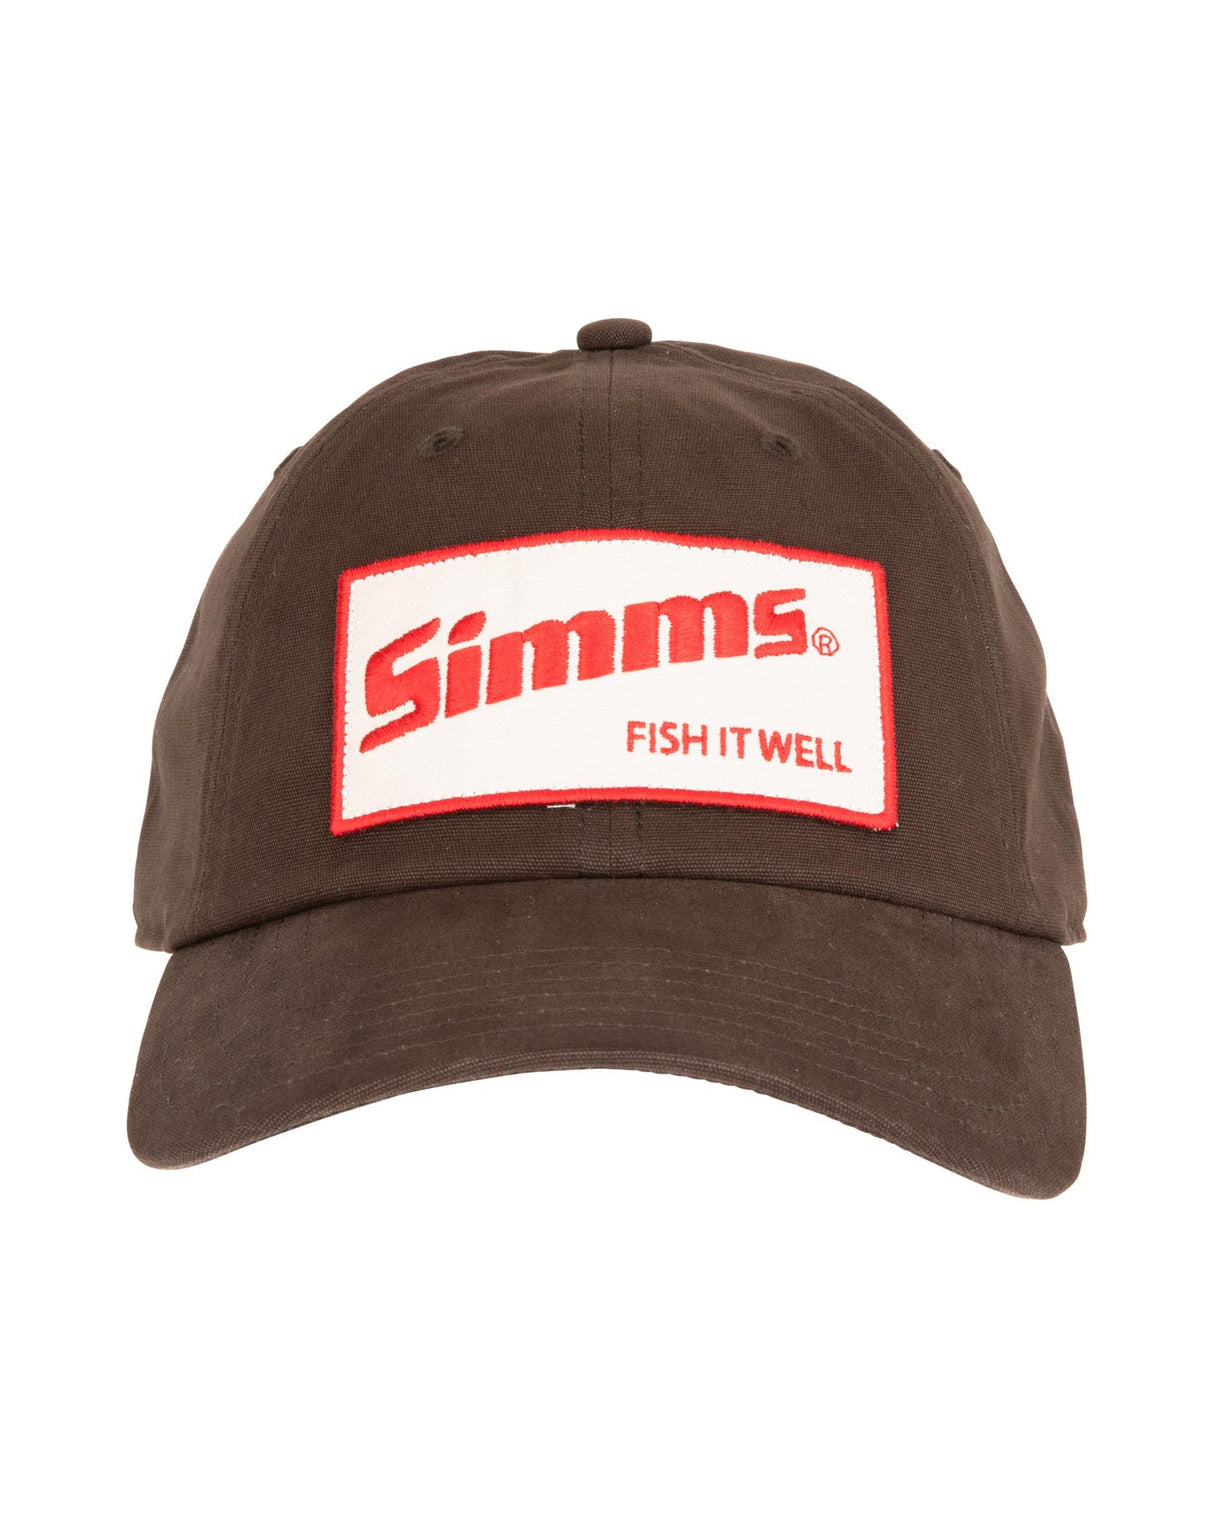 SIMMS FISH IT WELL CAP HICKORY